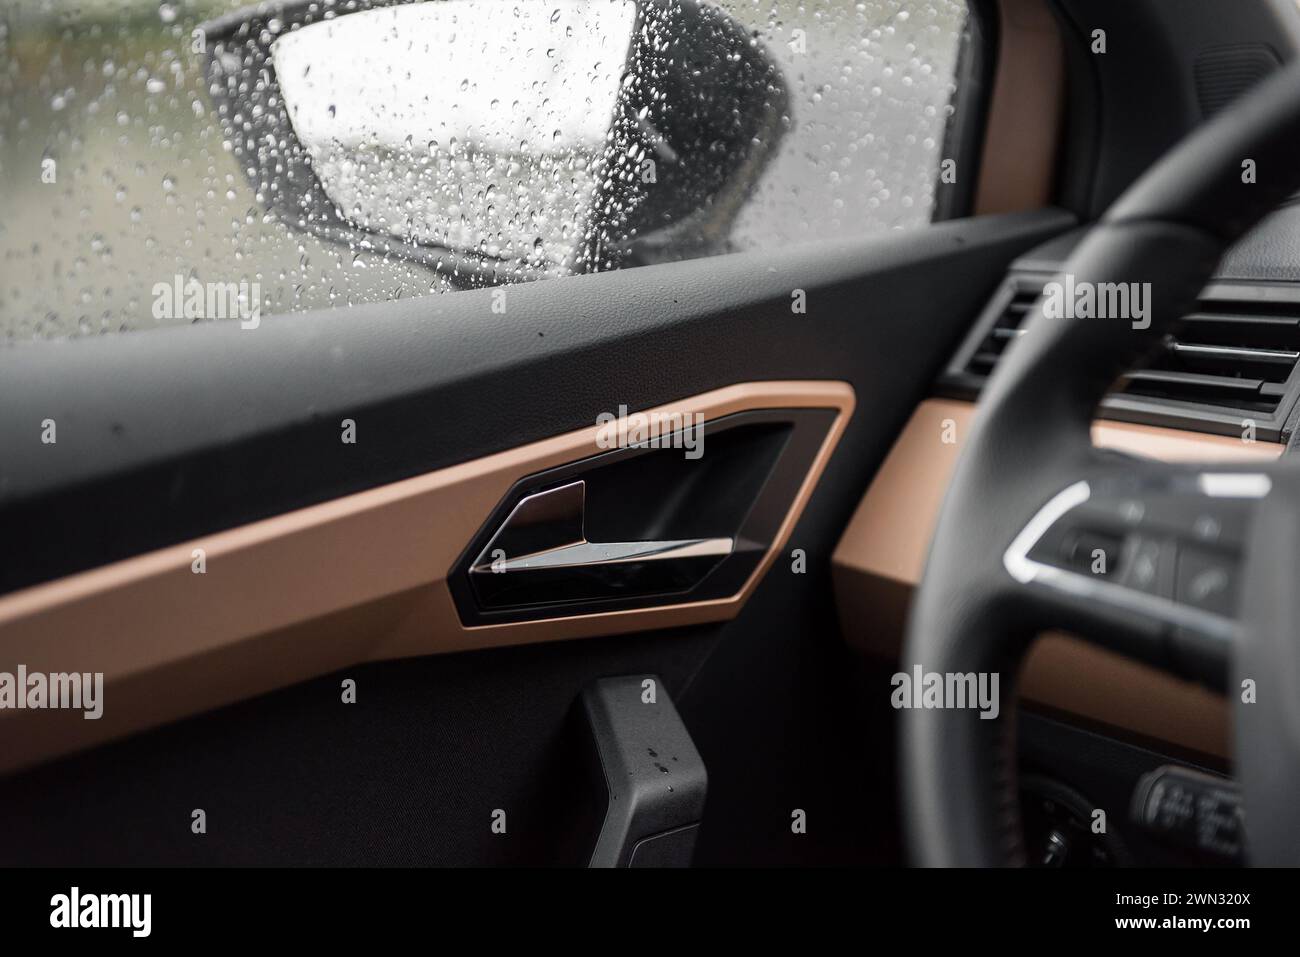 Driving in car in a rain. Cozy atmosphere and raindrops on widows. Car door handle and copper trim elements. Stock Photo